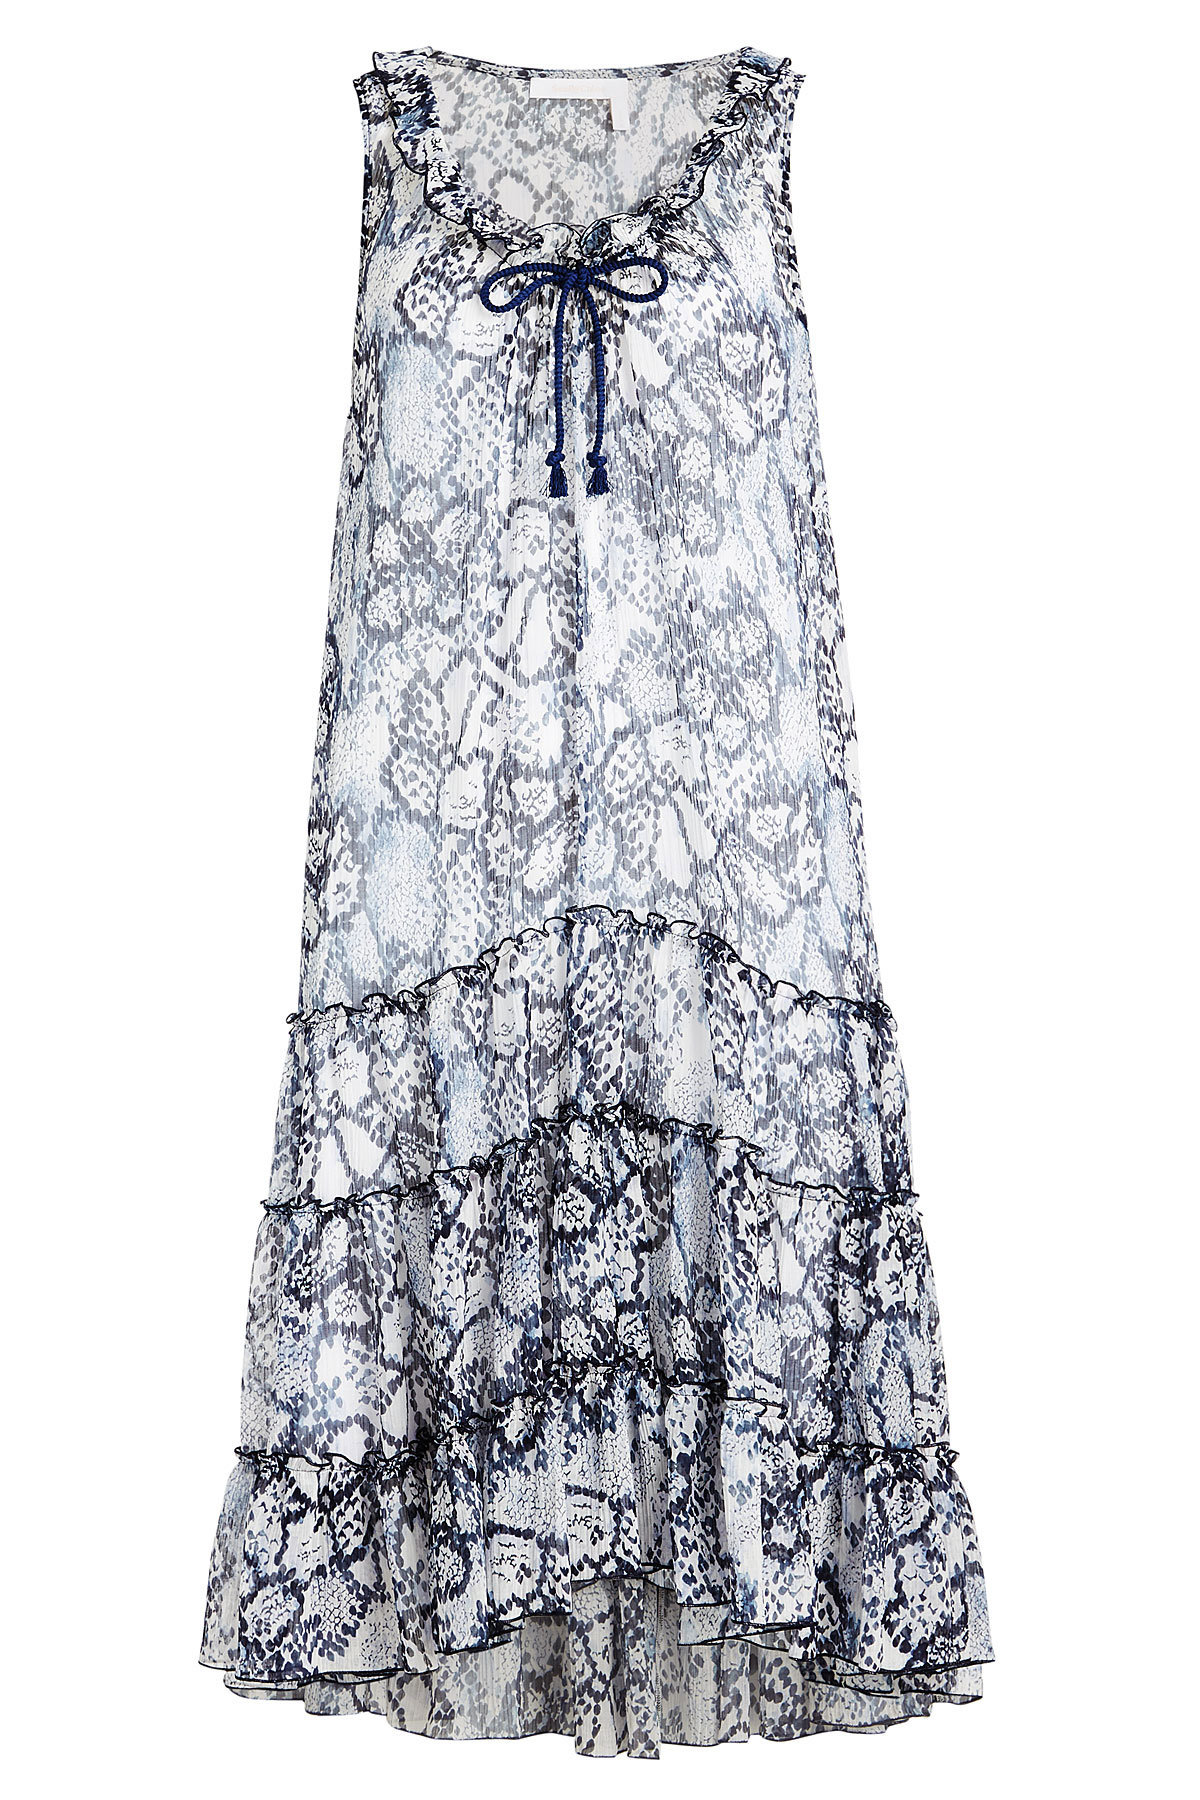 See by Chloe - Flower Python Printed Dress in Cotton and Silk